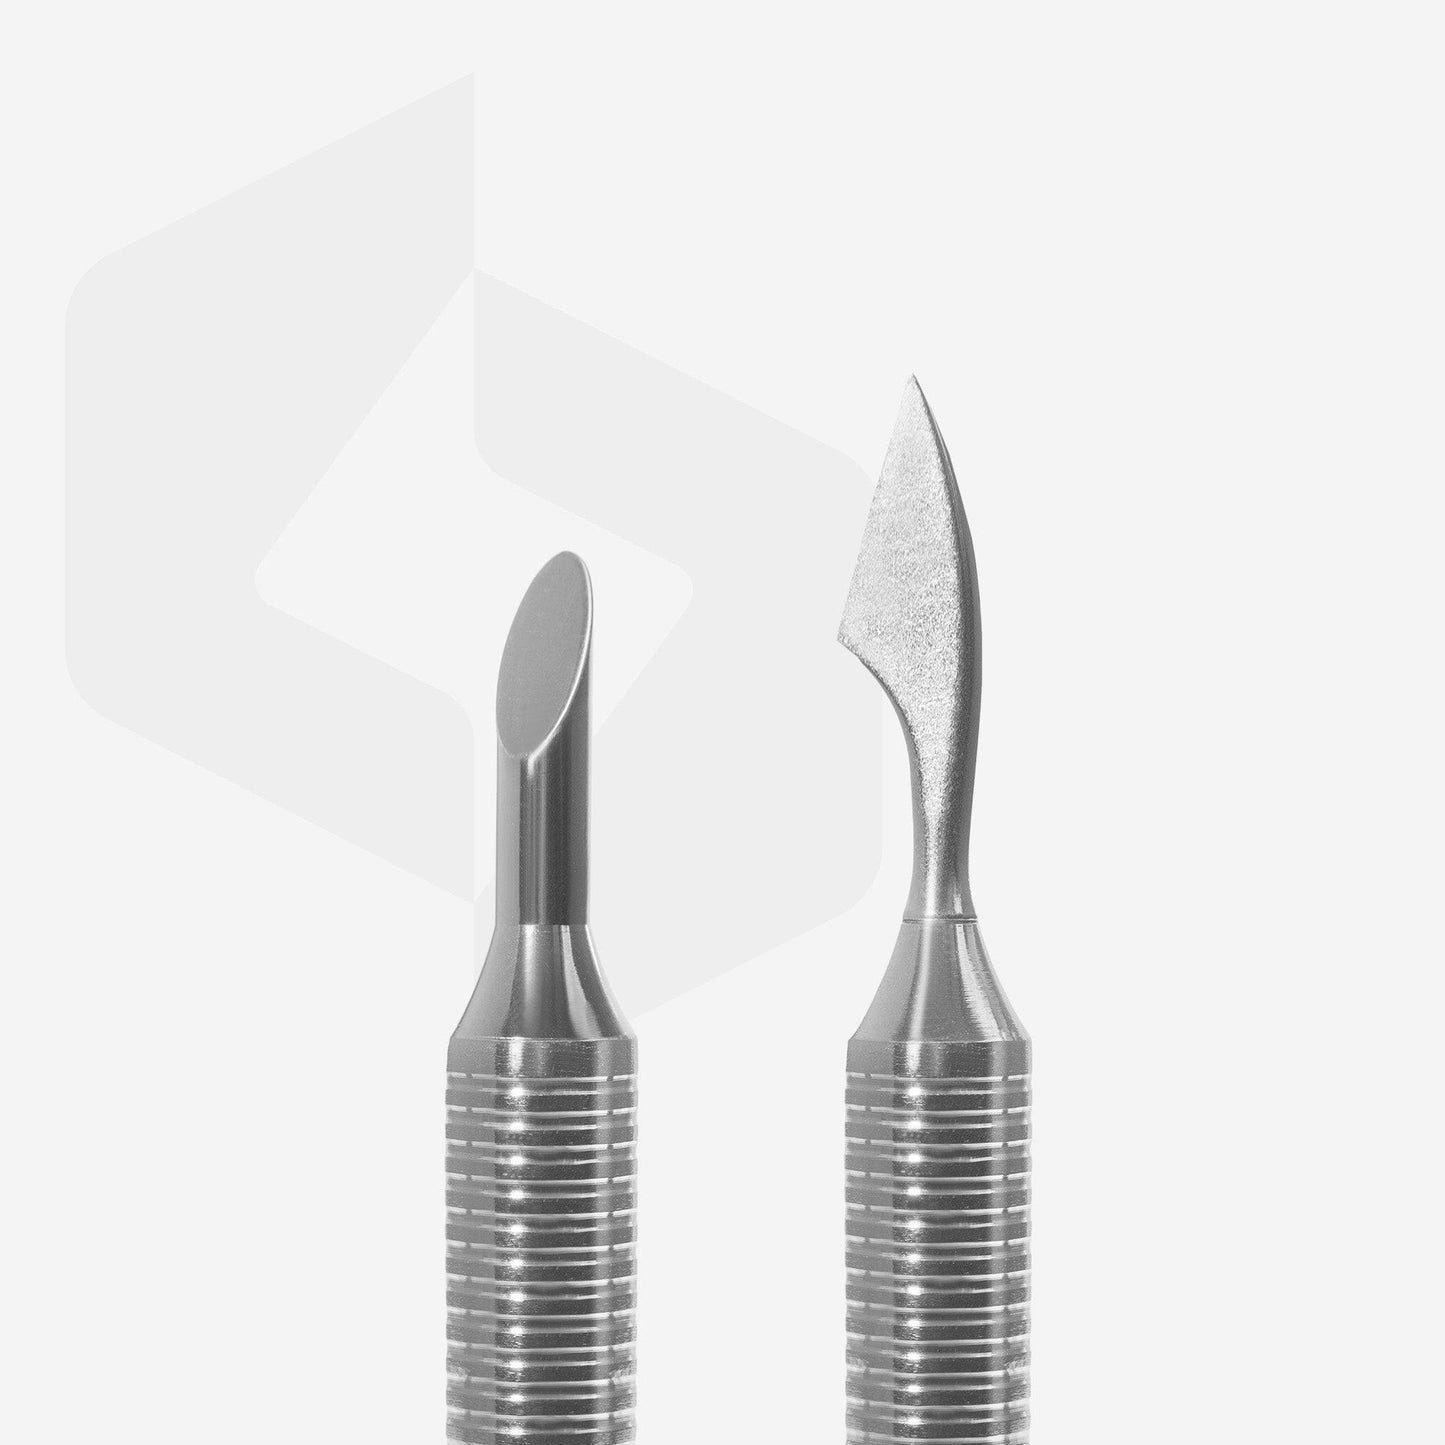 Staleks Hollow manicure pusher EXPERT 100 TYPE 1 (slant pusher and cleaner) - F.O.X Nails USA